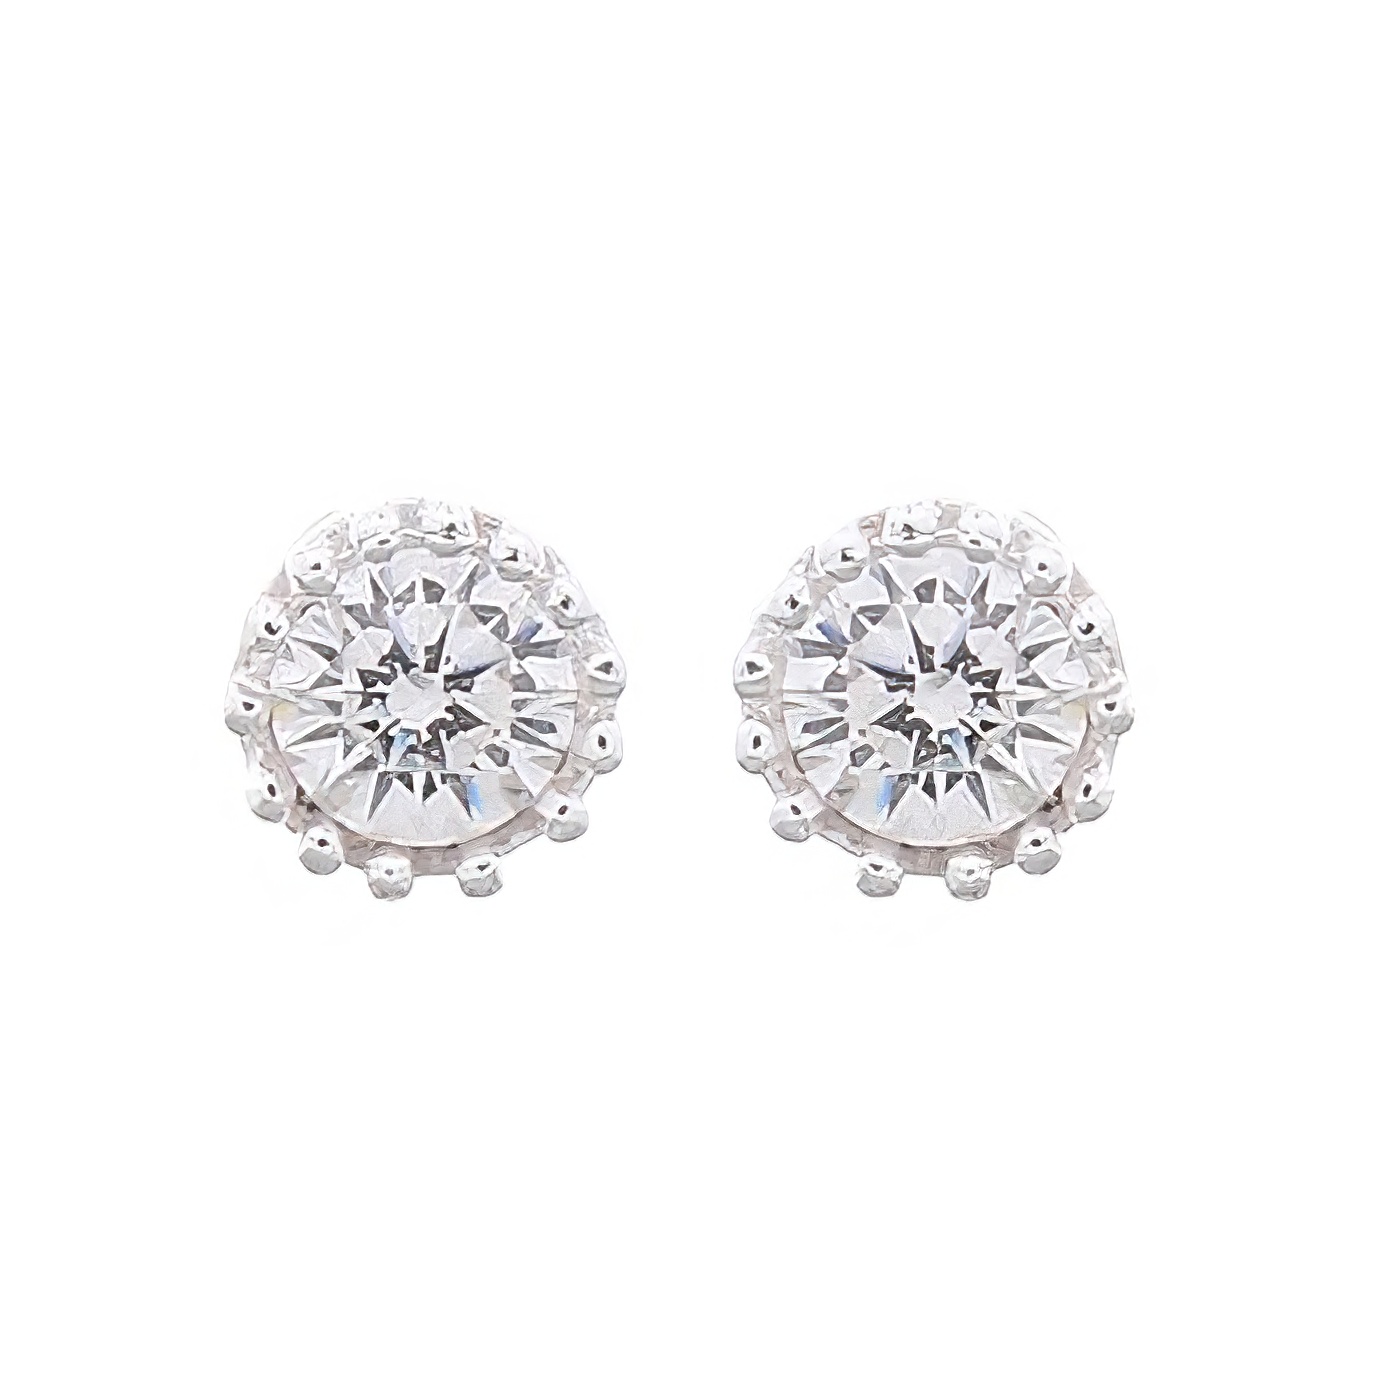 Faceted Mini White Cubic Zirconia 925 Stud Earrings Silver by BeYindi 